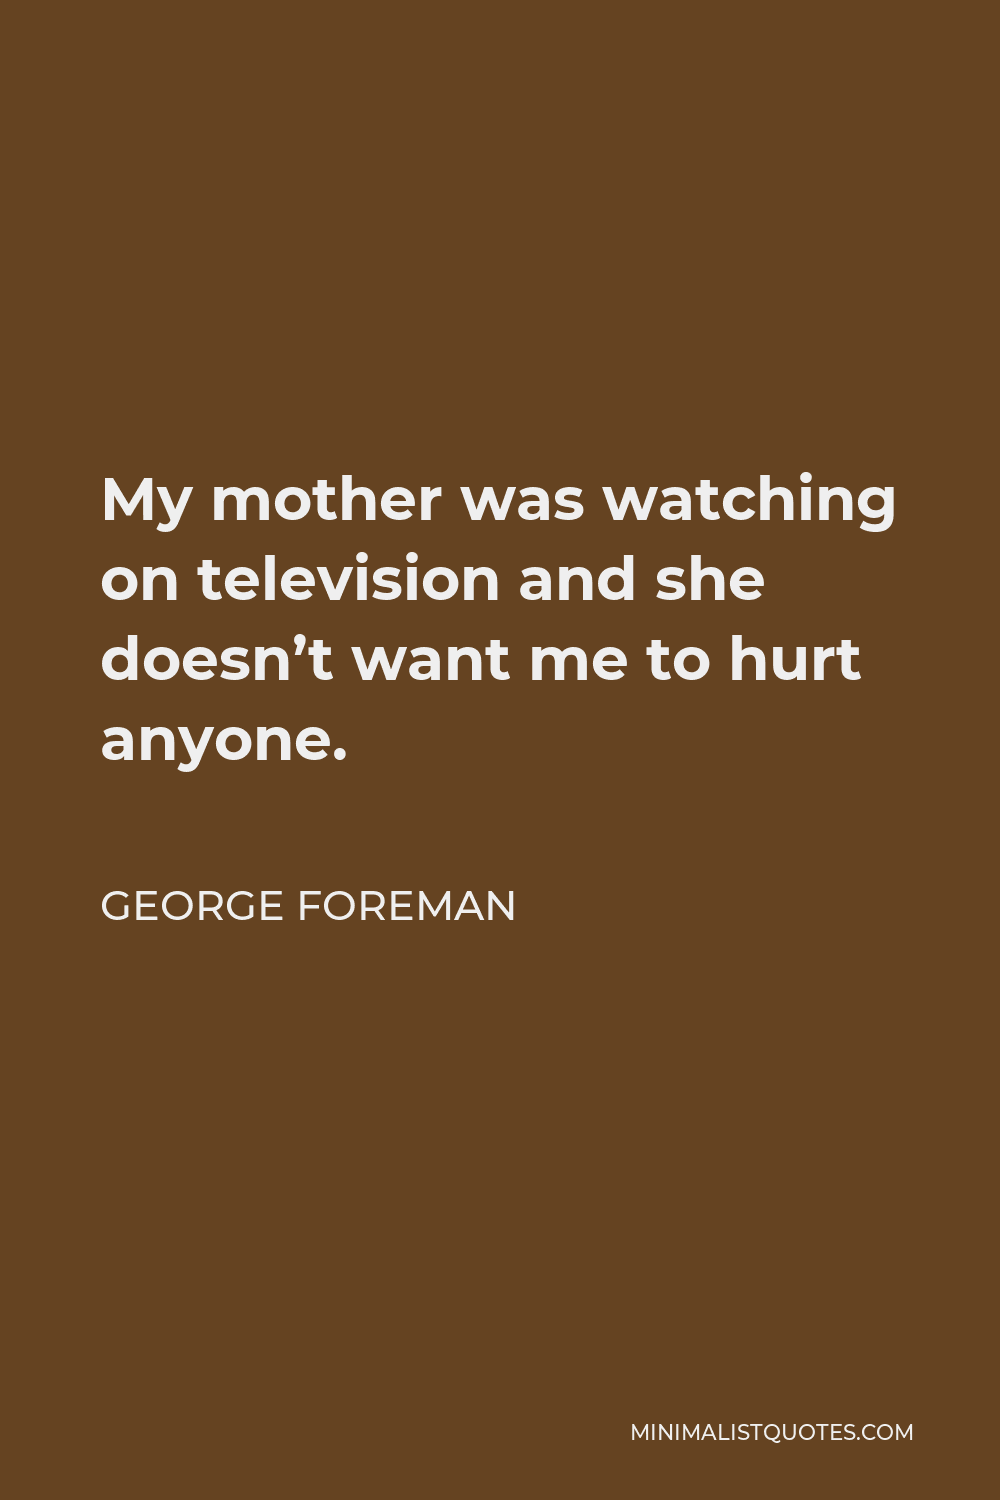 George Foreman Quote - My mother was watching on television and she doesn’t want me to hurt anyone.